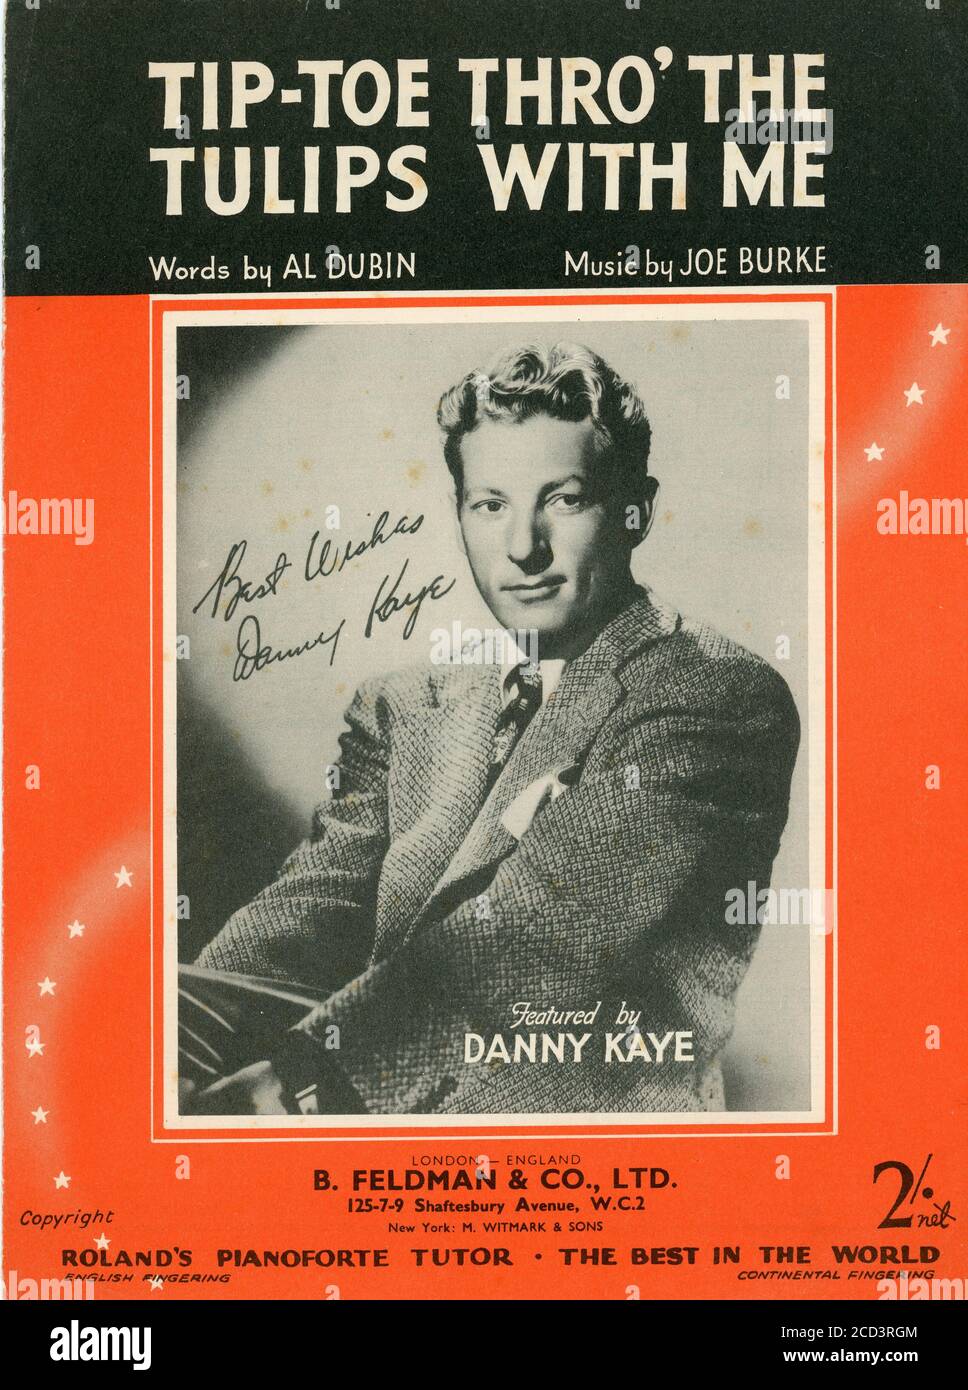 Sheet Music - Tip-toe Thro' the Tulips with me - Danny Kaye - 1950 Stock Photo